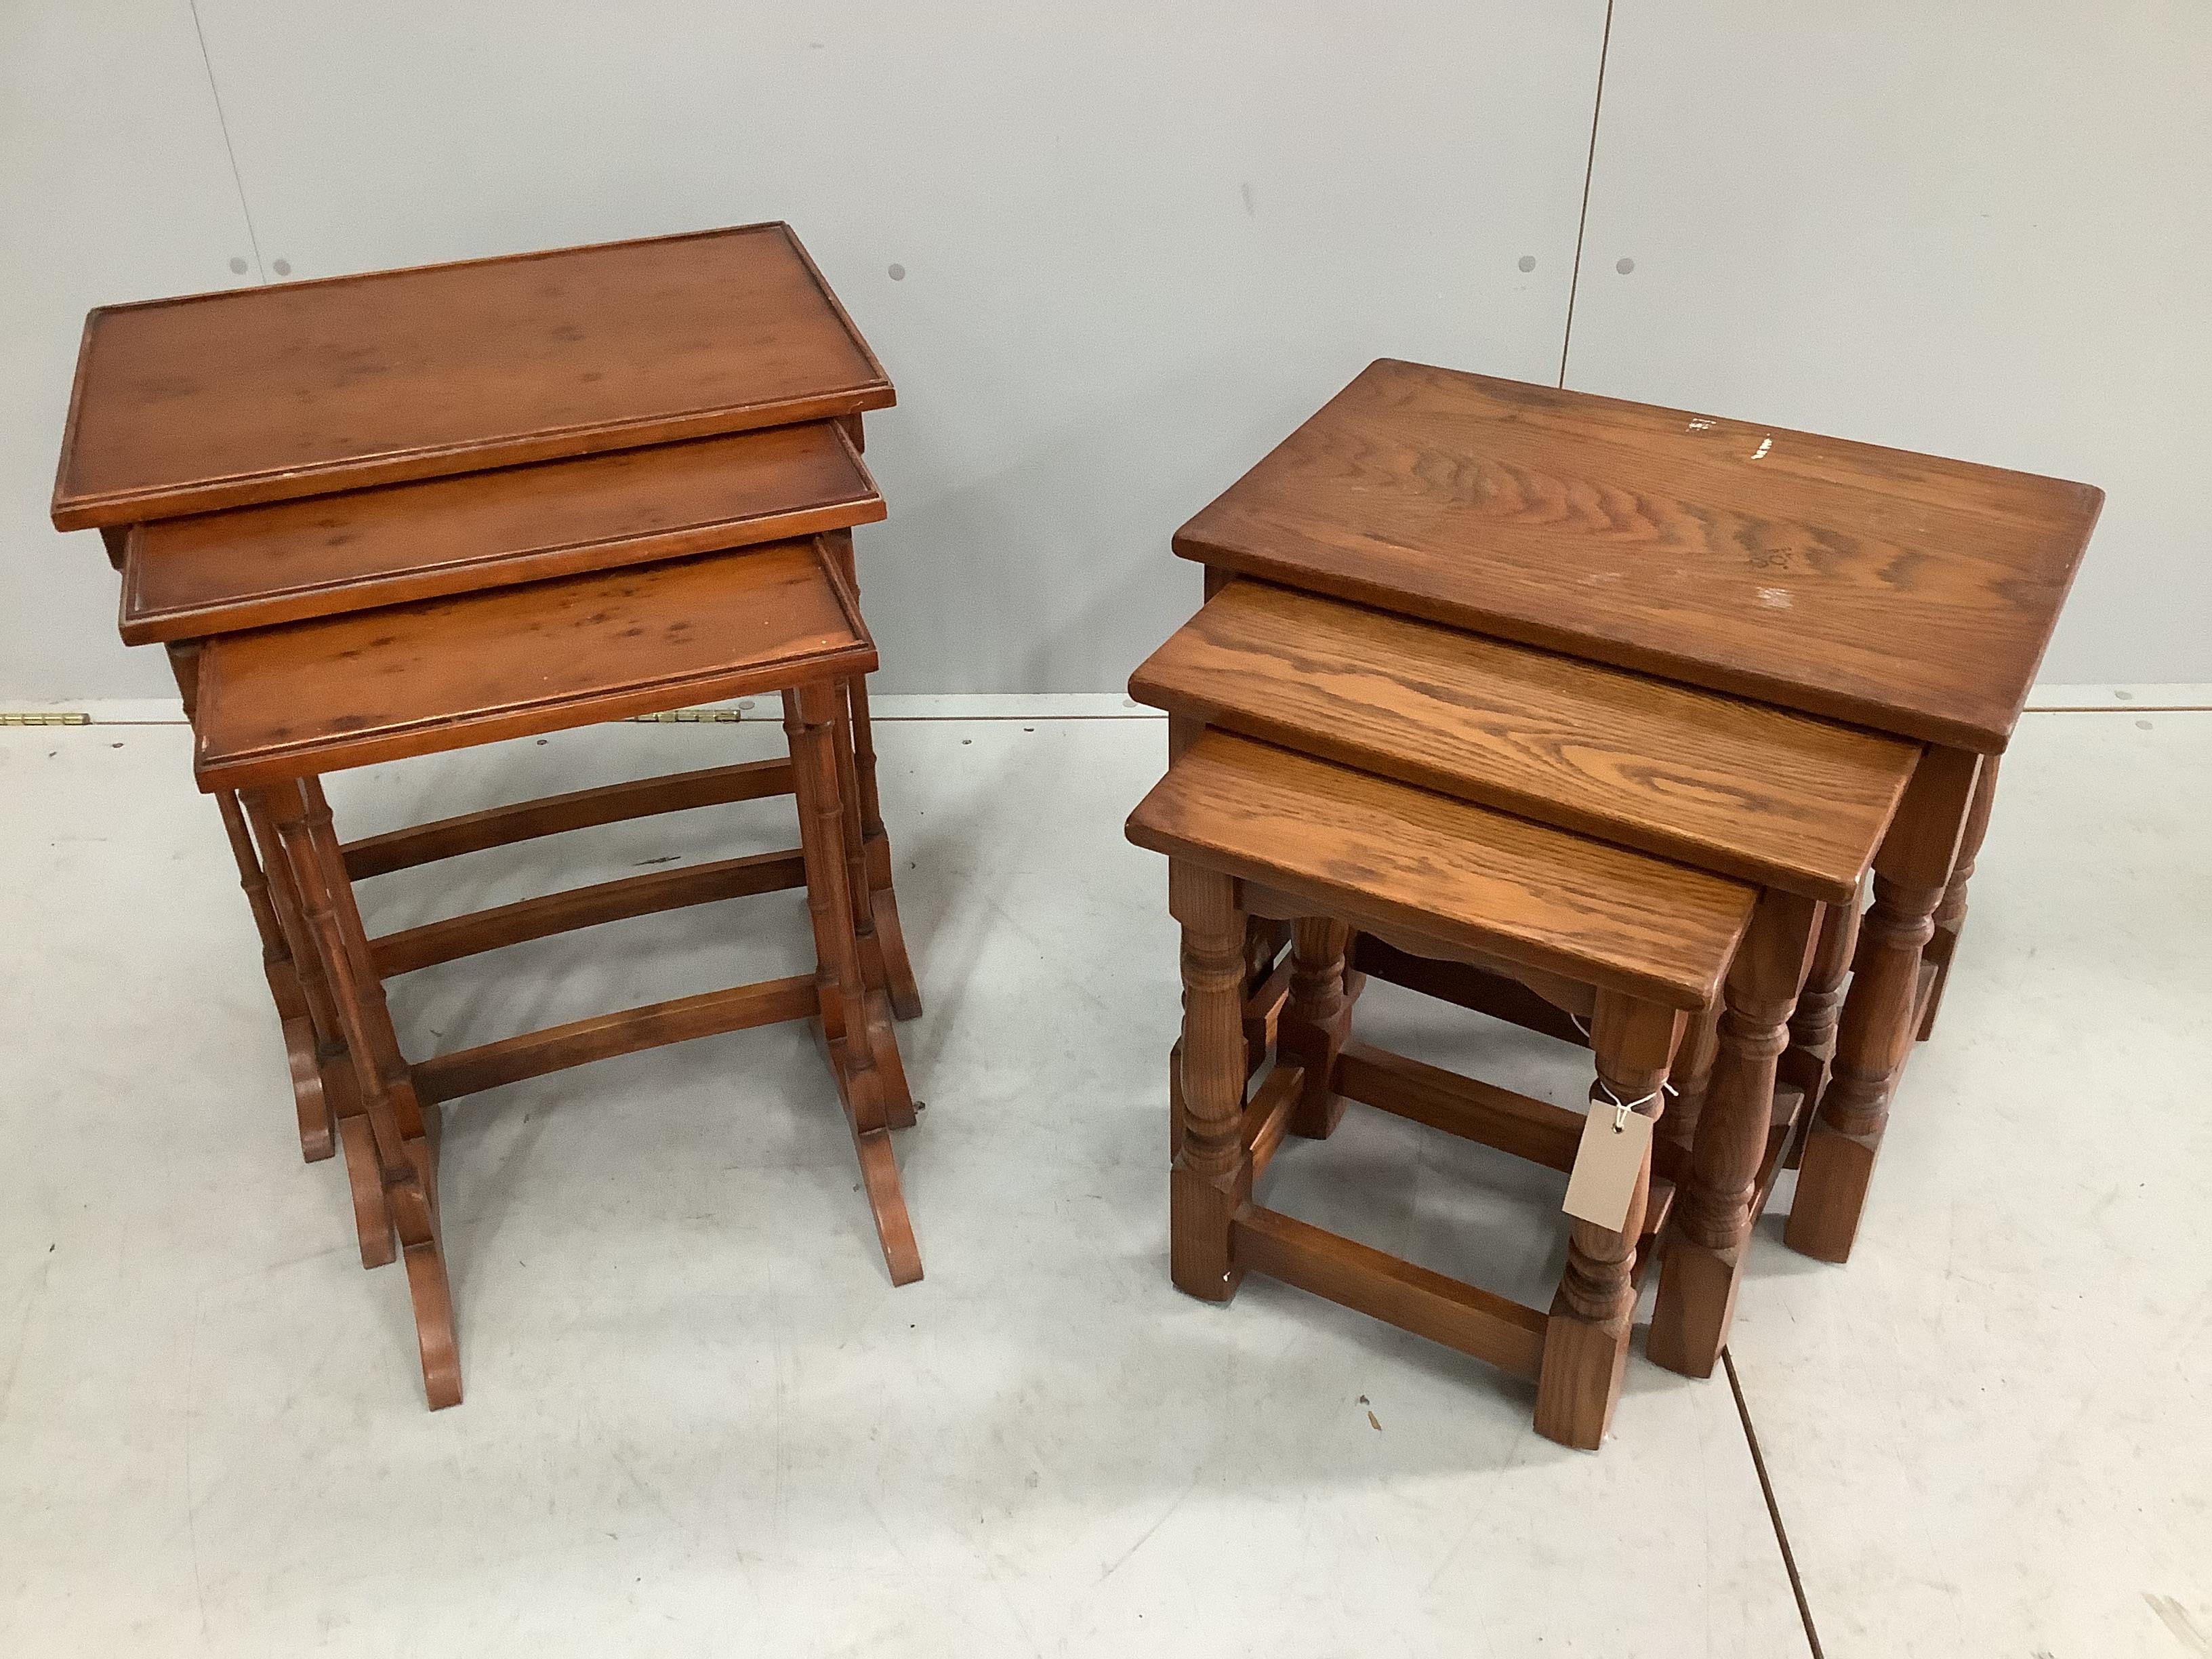 A nest of three rectangular oak tea tables, width 54cm, depth 35cm, height 48cm together with a nest of rectangular yew tea tables                                                                                          